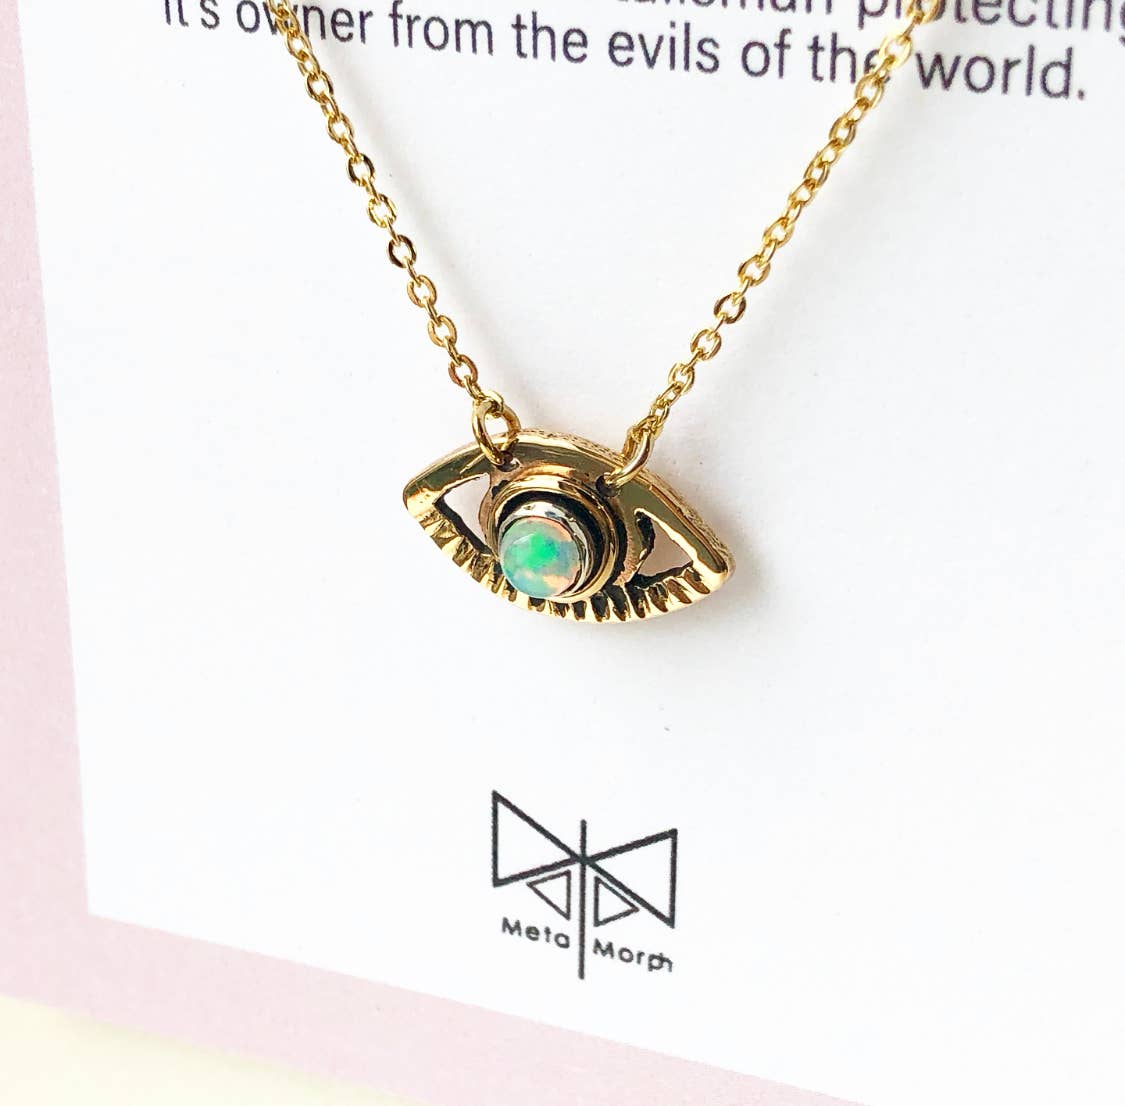 14 kt. Evil eye Charm w/ gold plated necklace - Moon Room Shop and Wellness